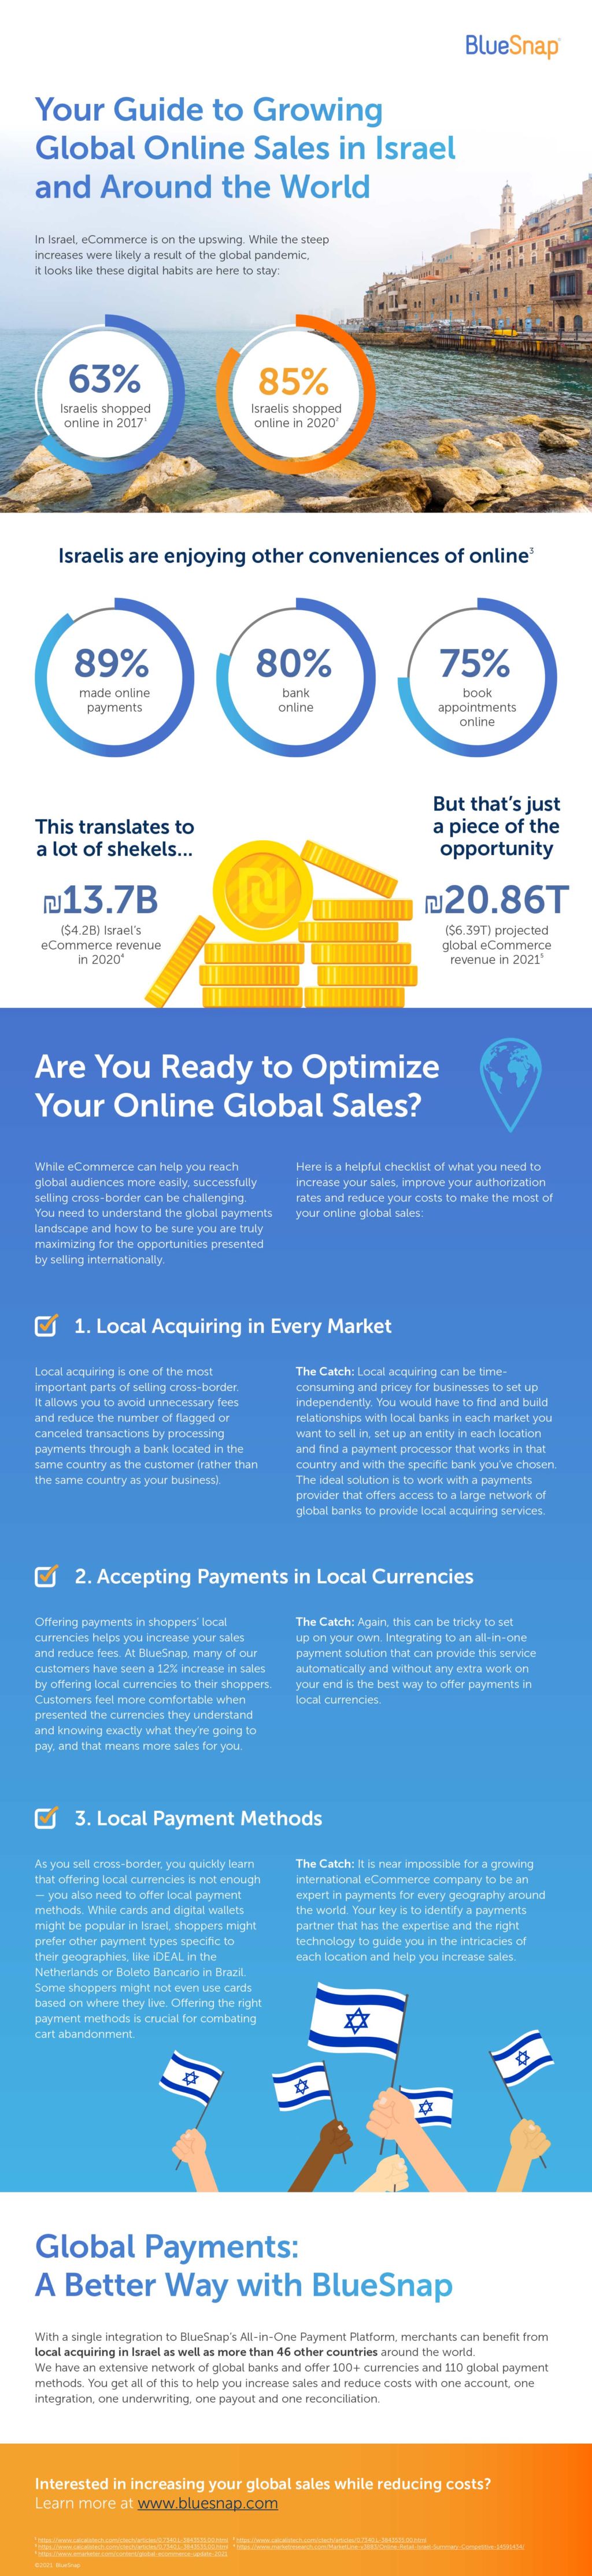 Your Guide to Growing Online Sales in Israel and Around the World